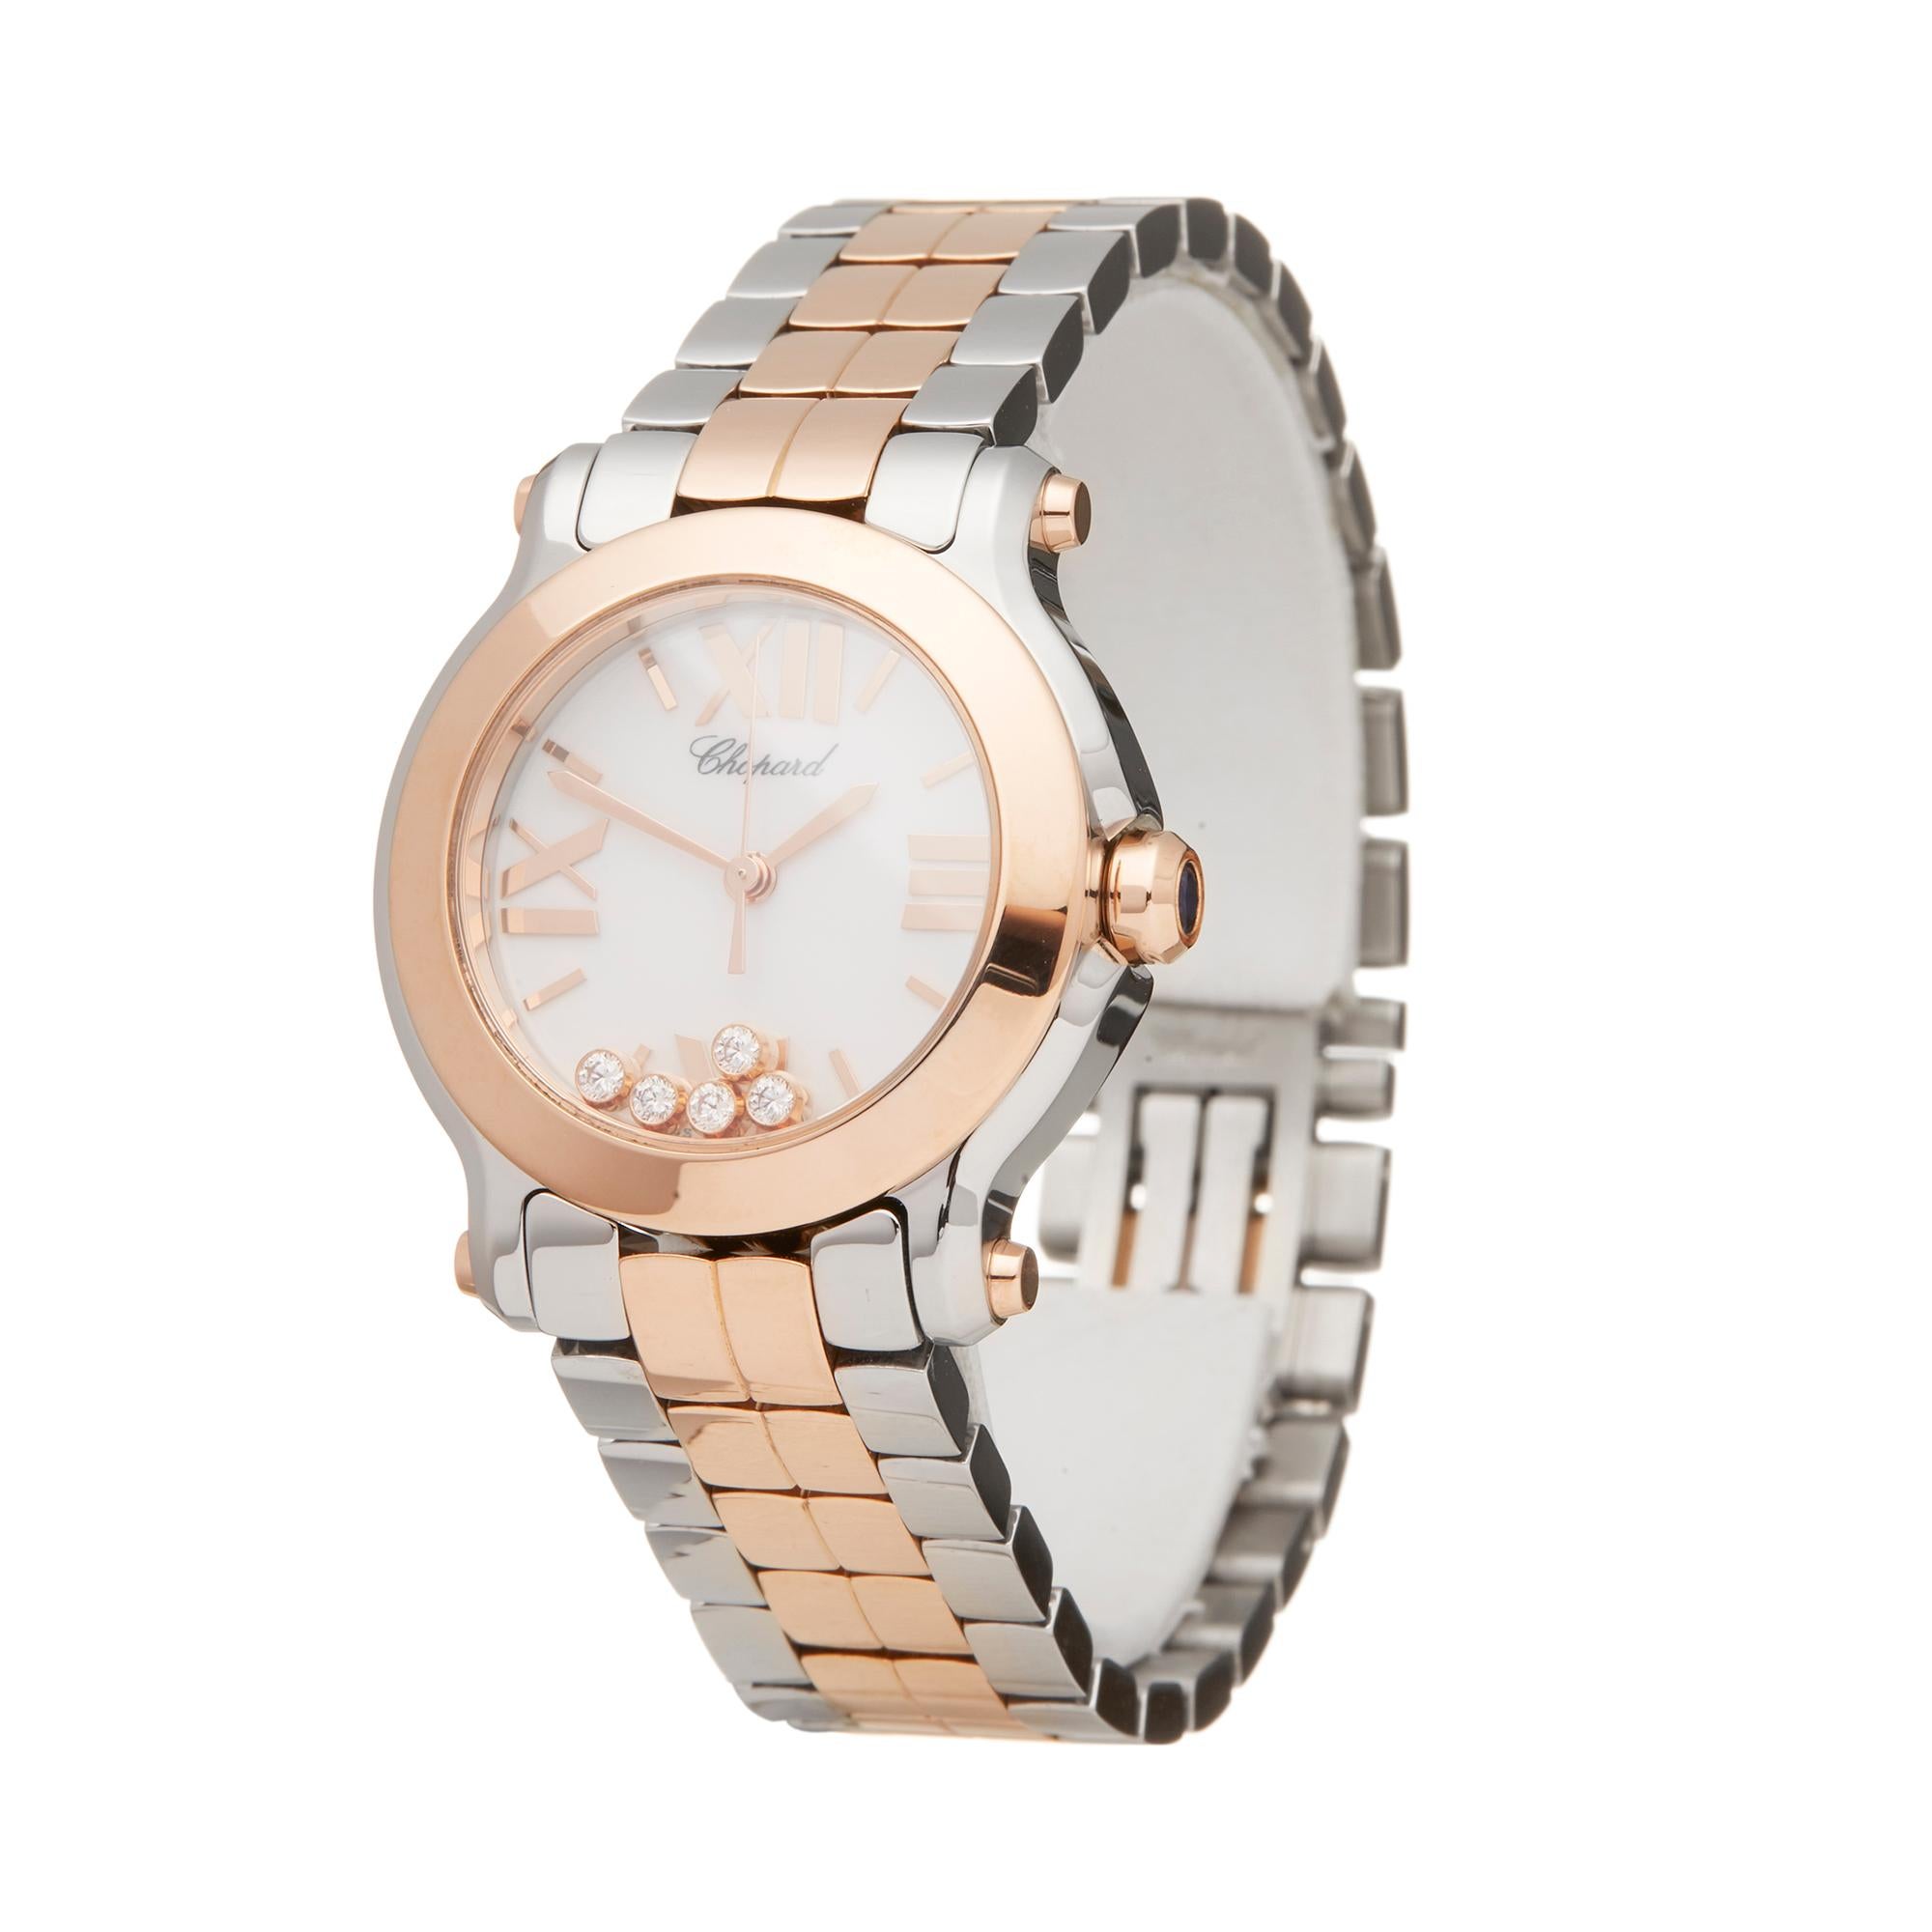 Reference: W5955
Manufacturer: Chopard
Model: Happy Sport
Model Reference: 278509-6003
Age: 11th July 2012
Gender: Women's
Box and Papers: Box, Manuals and Guarantee
Dial: White Roman
Glass: Sapphire Crystal
Movement: Quartz
Water Resistance: To